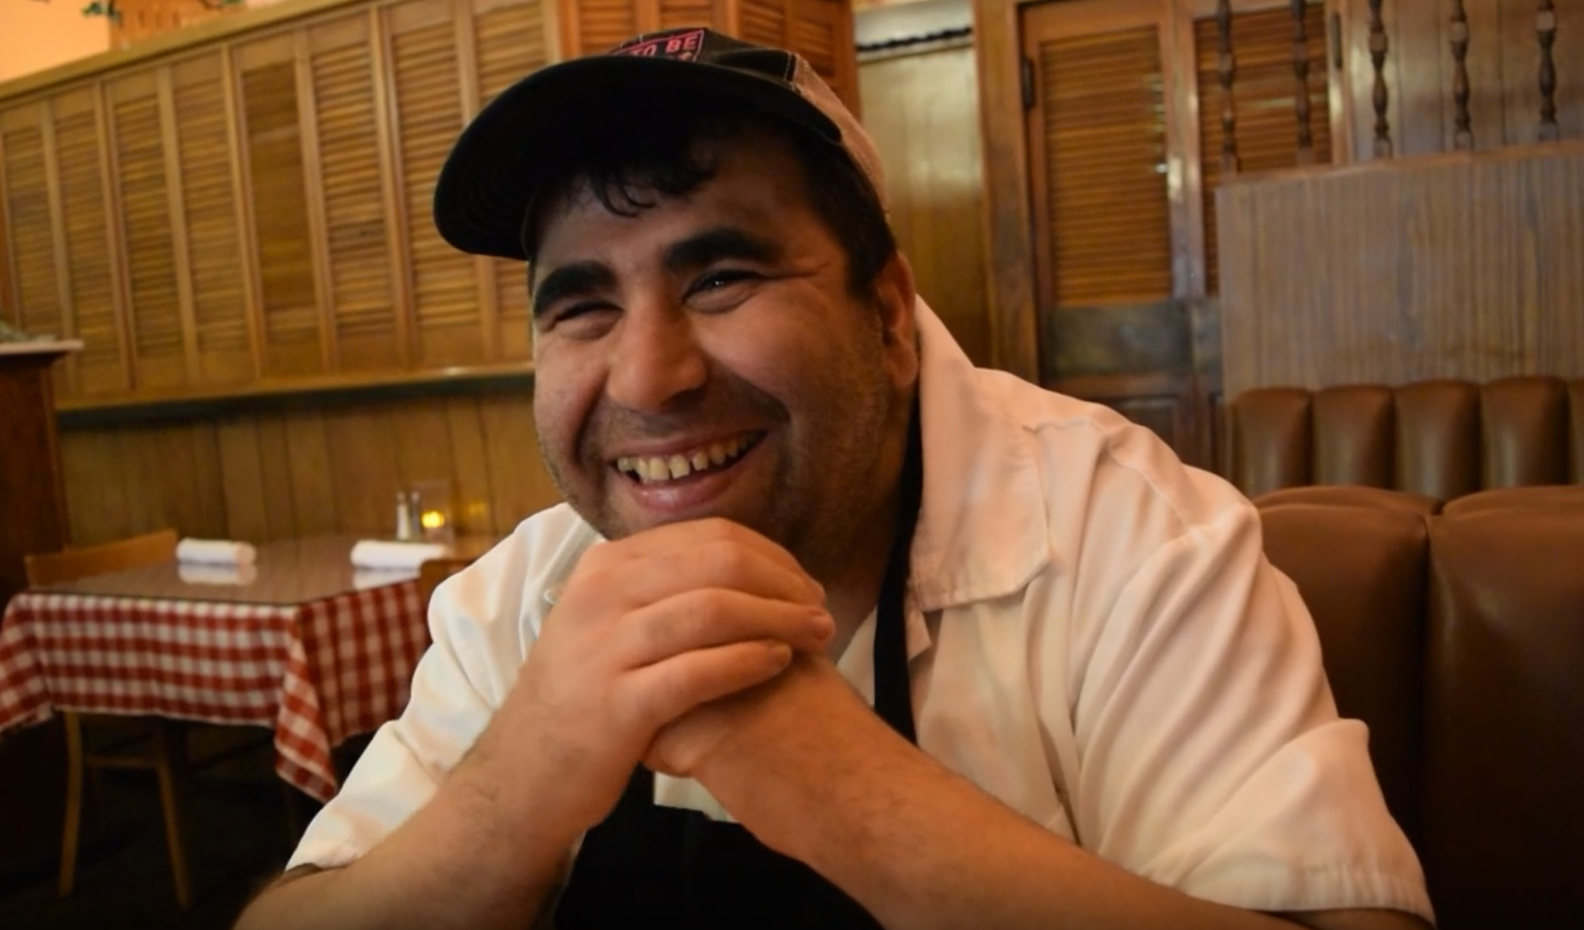 man with hat smiling in restaurant